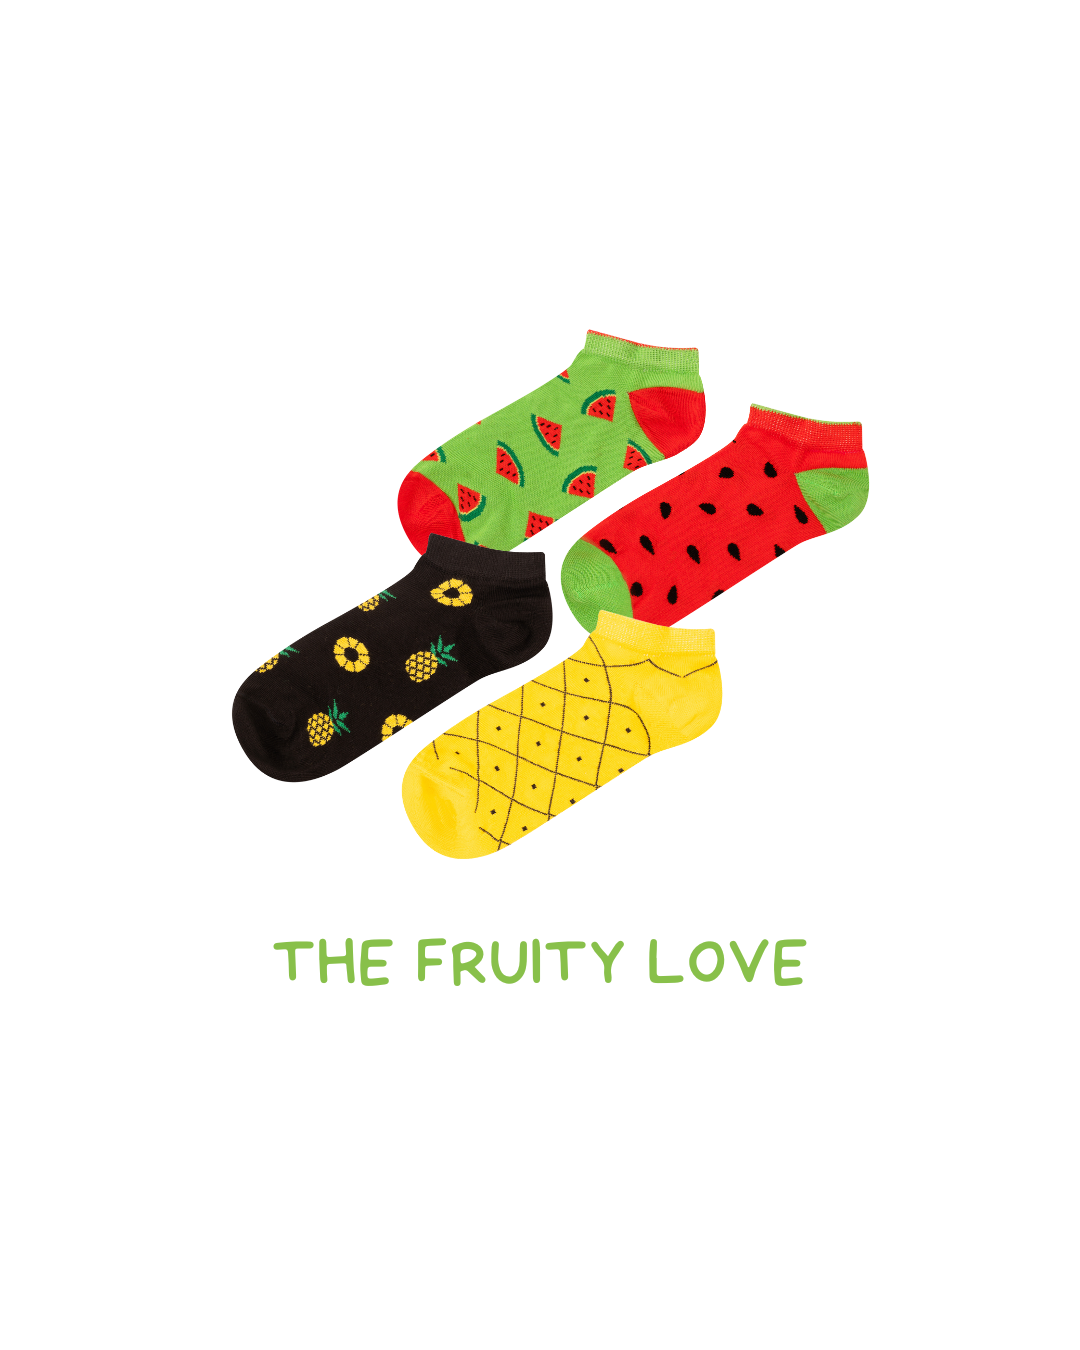 The Fruity Love